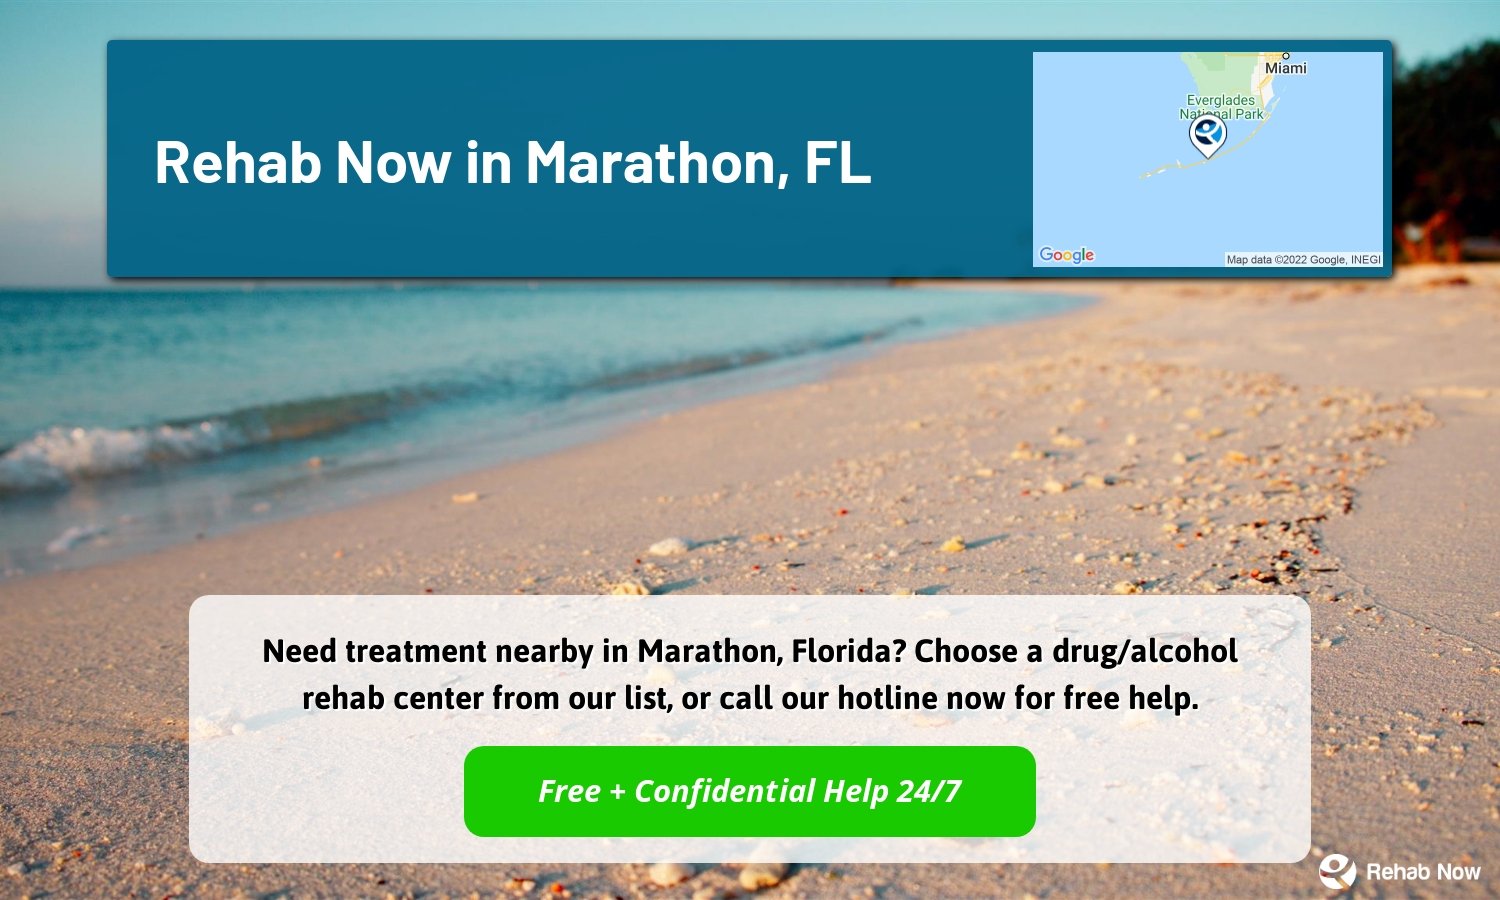 Need treatment nearby in Marathon, Florida? Choose a drug/alcohol rehab center from our list, or call our hotline now for free help.